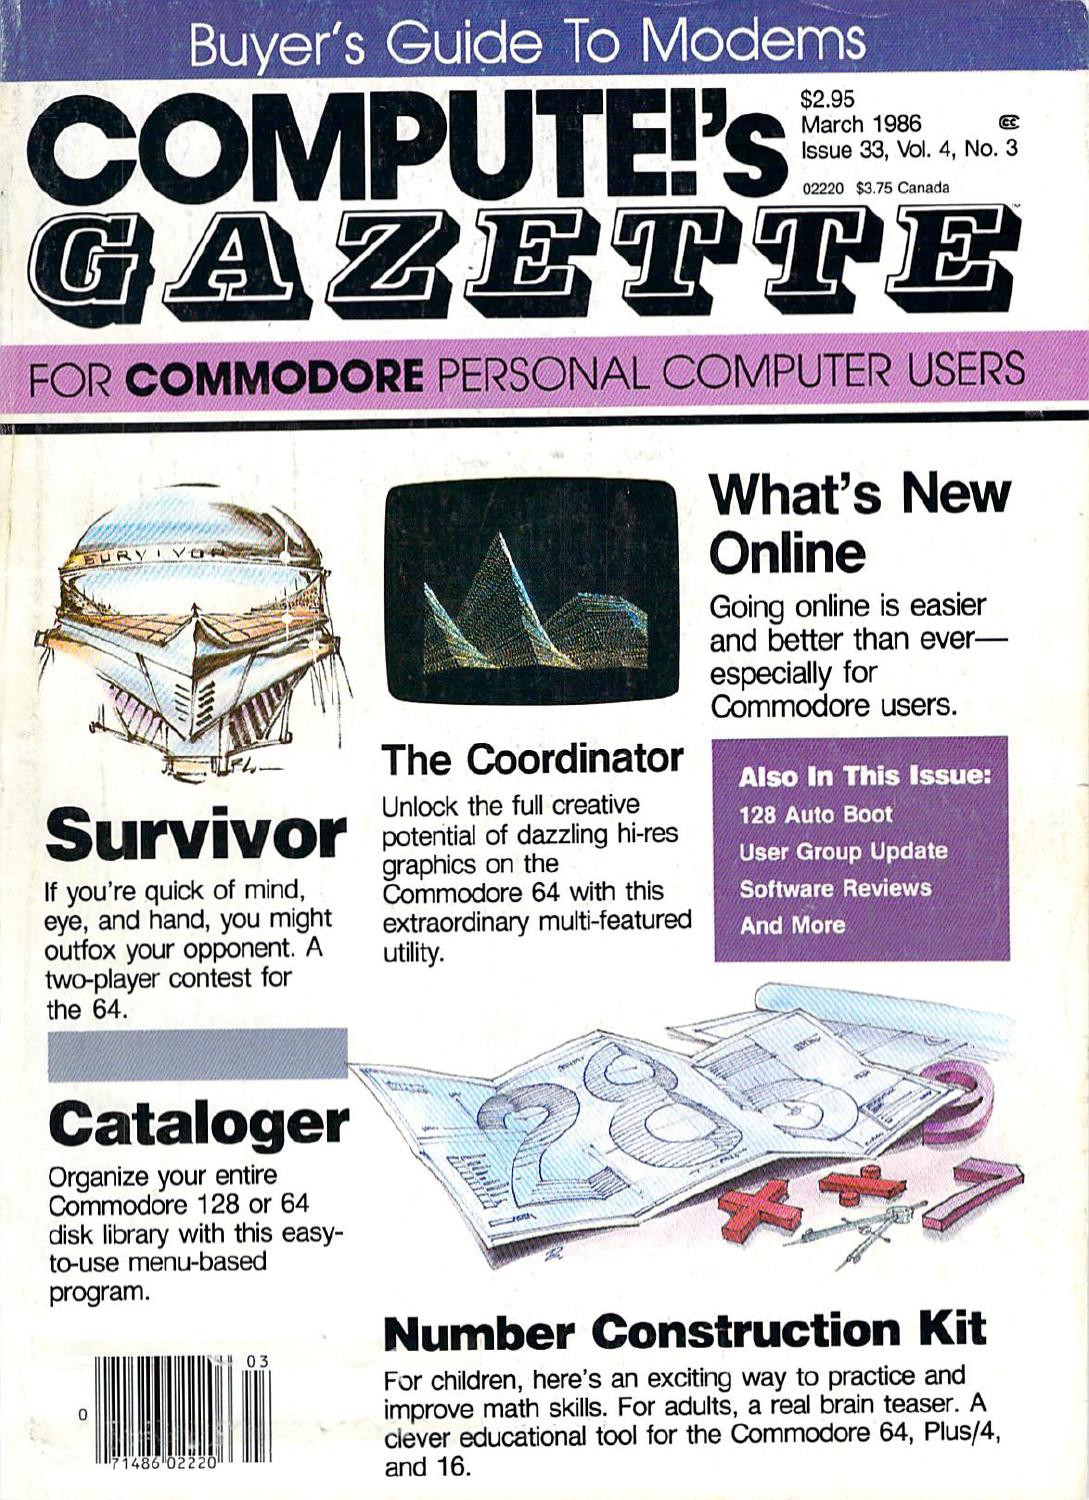 Printable Map Of 10/40 Window Inspirational Pute Gazette Issue 33 1986 Mar By Zetmoon Issuu